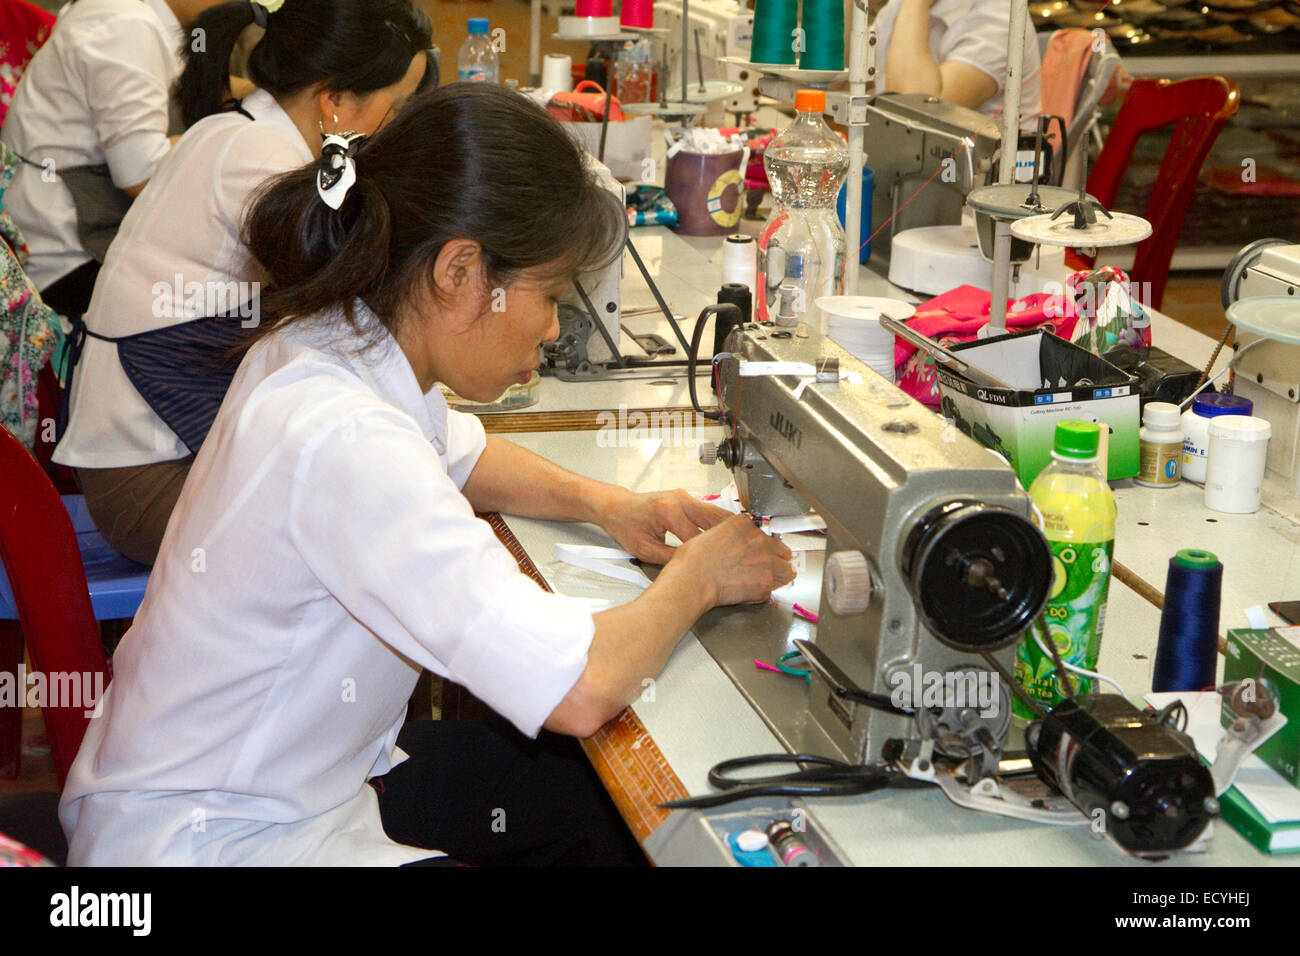 Workers using sewing machines at a clothing factory in Hanoi, Vietnam. Stock Photo